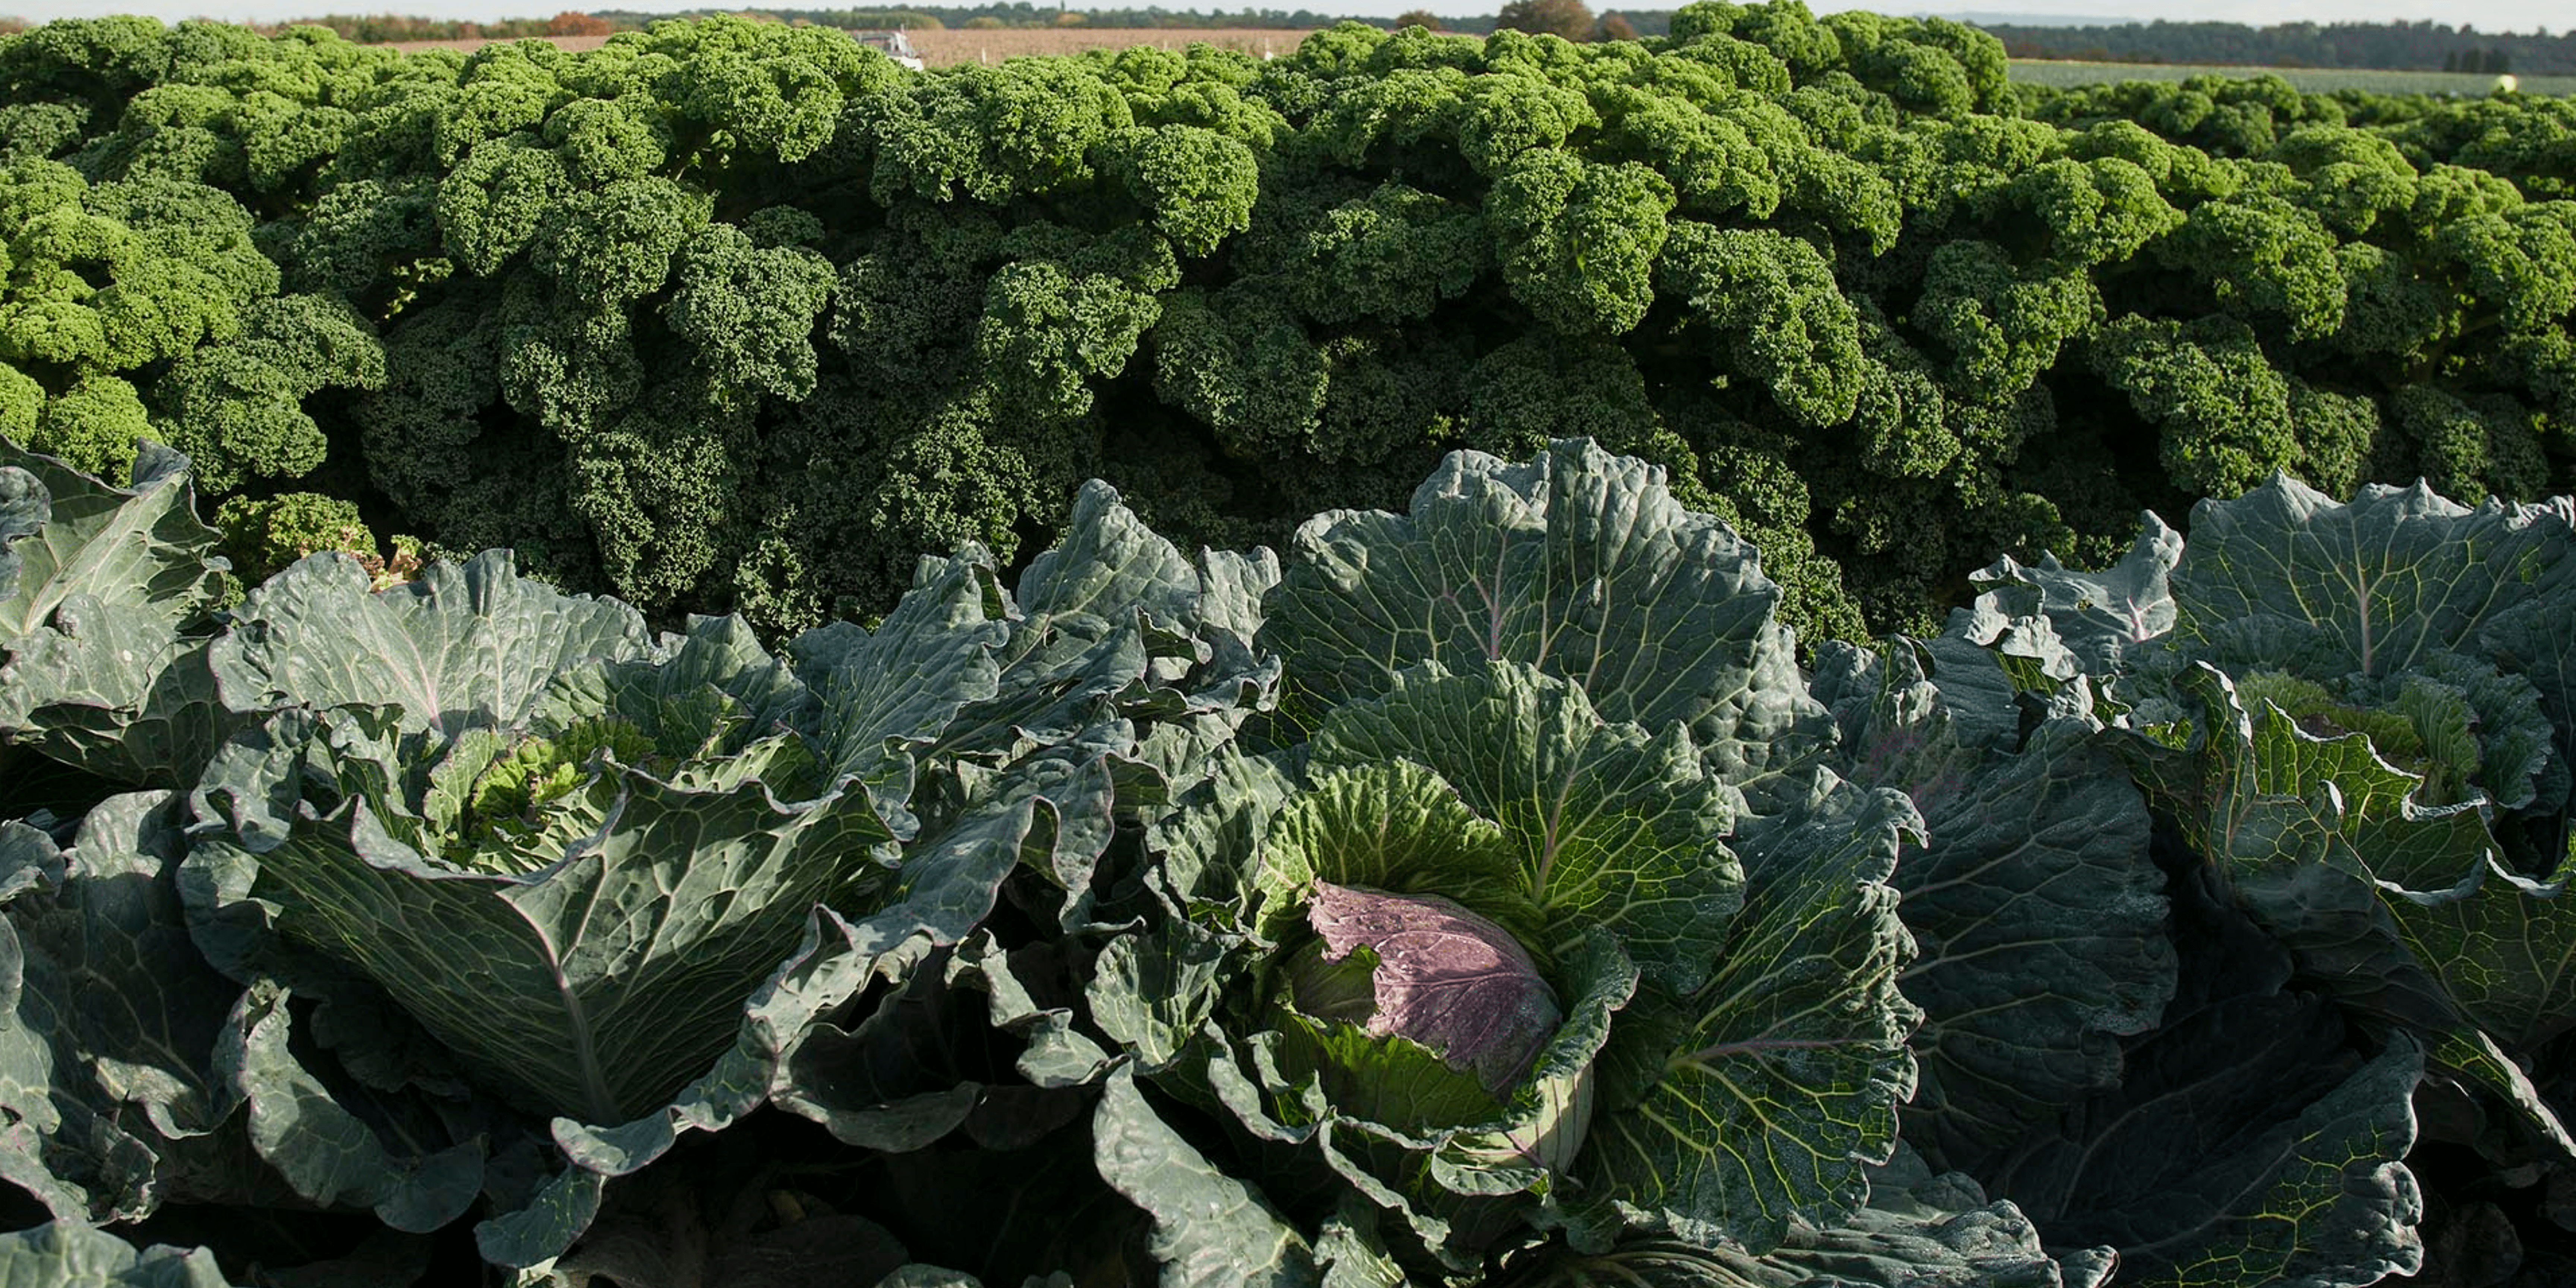 Fresh produce grown on our farms in the vale of Evesham, January Kind and Kale